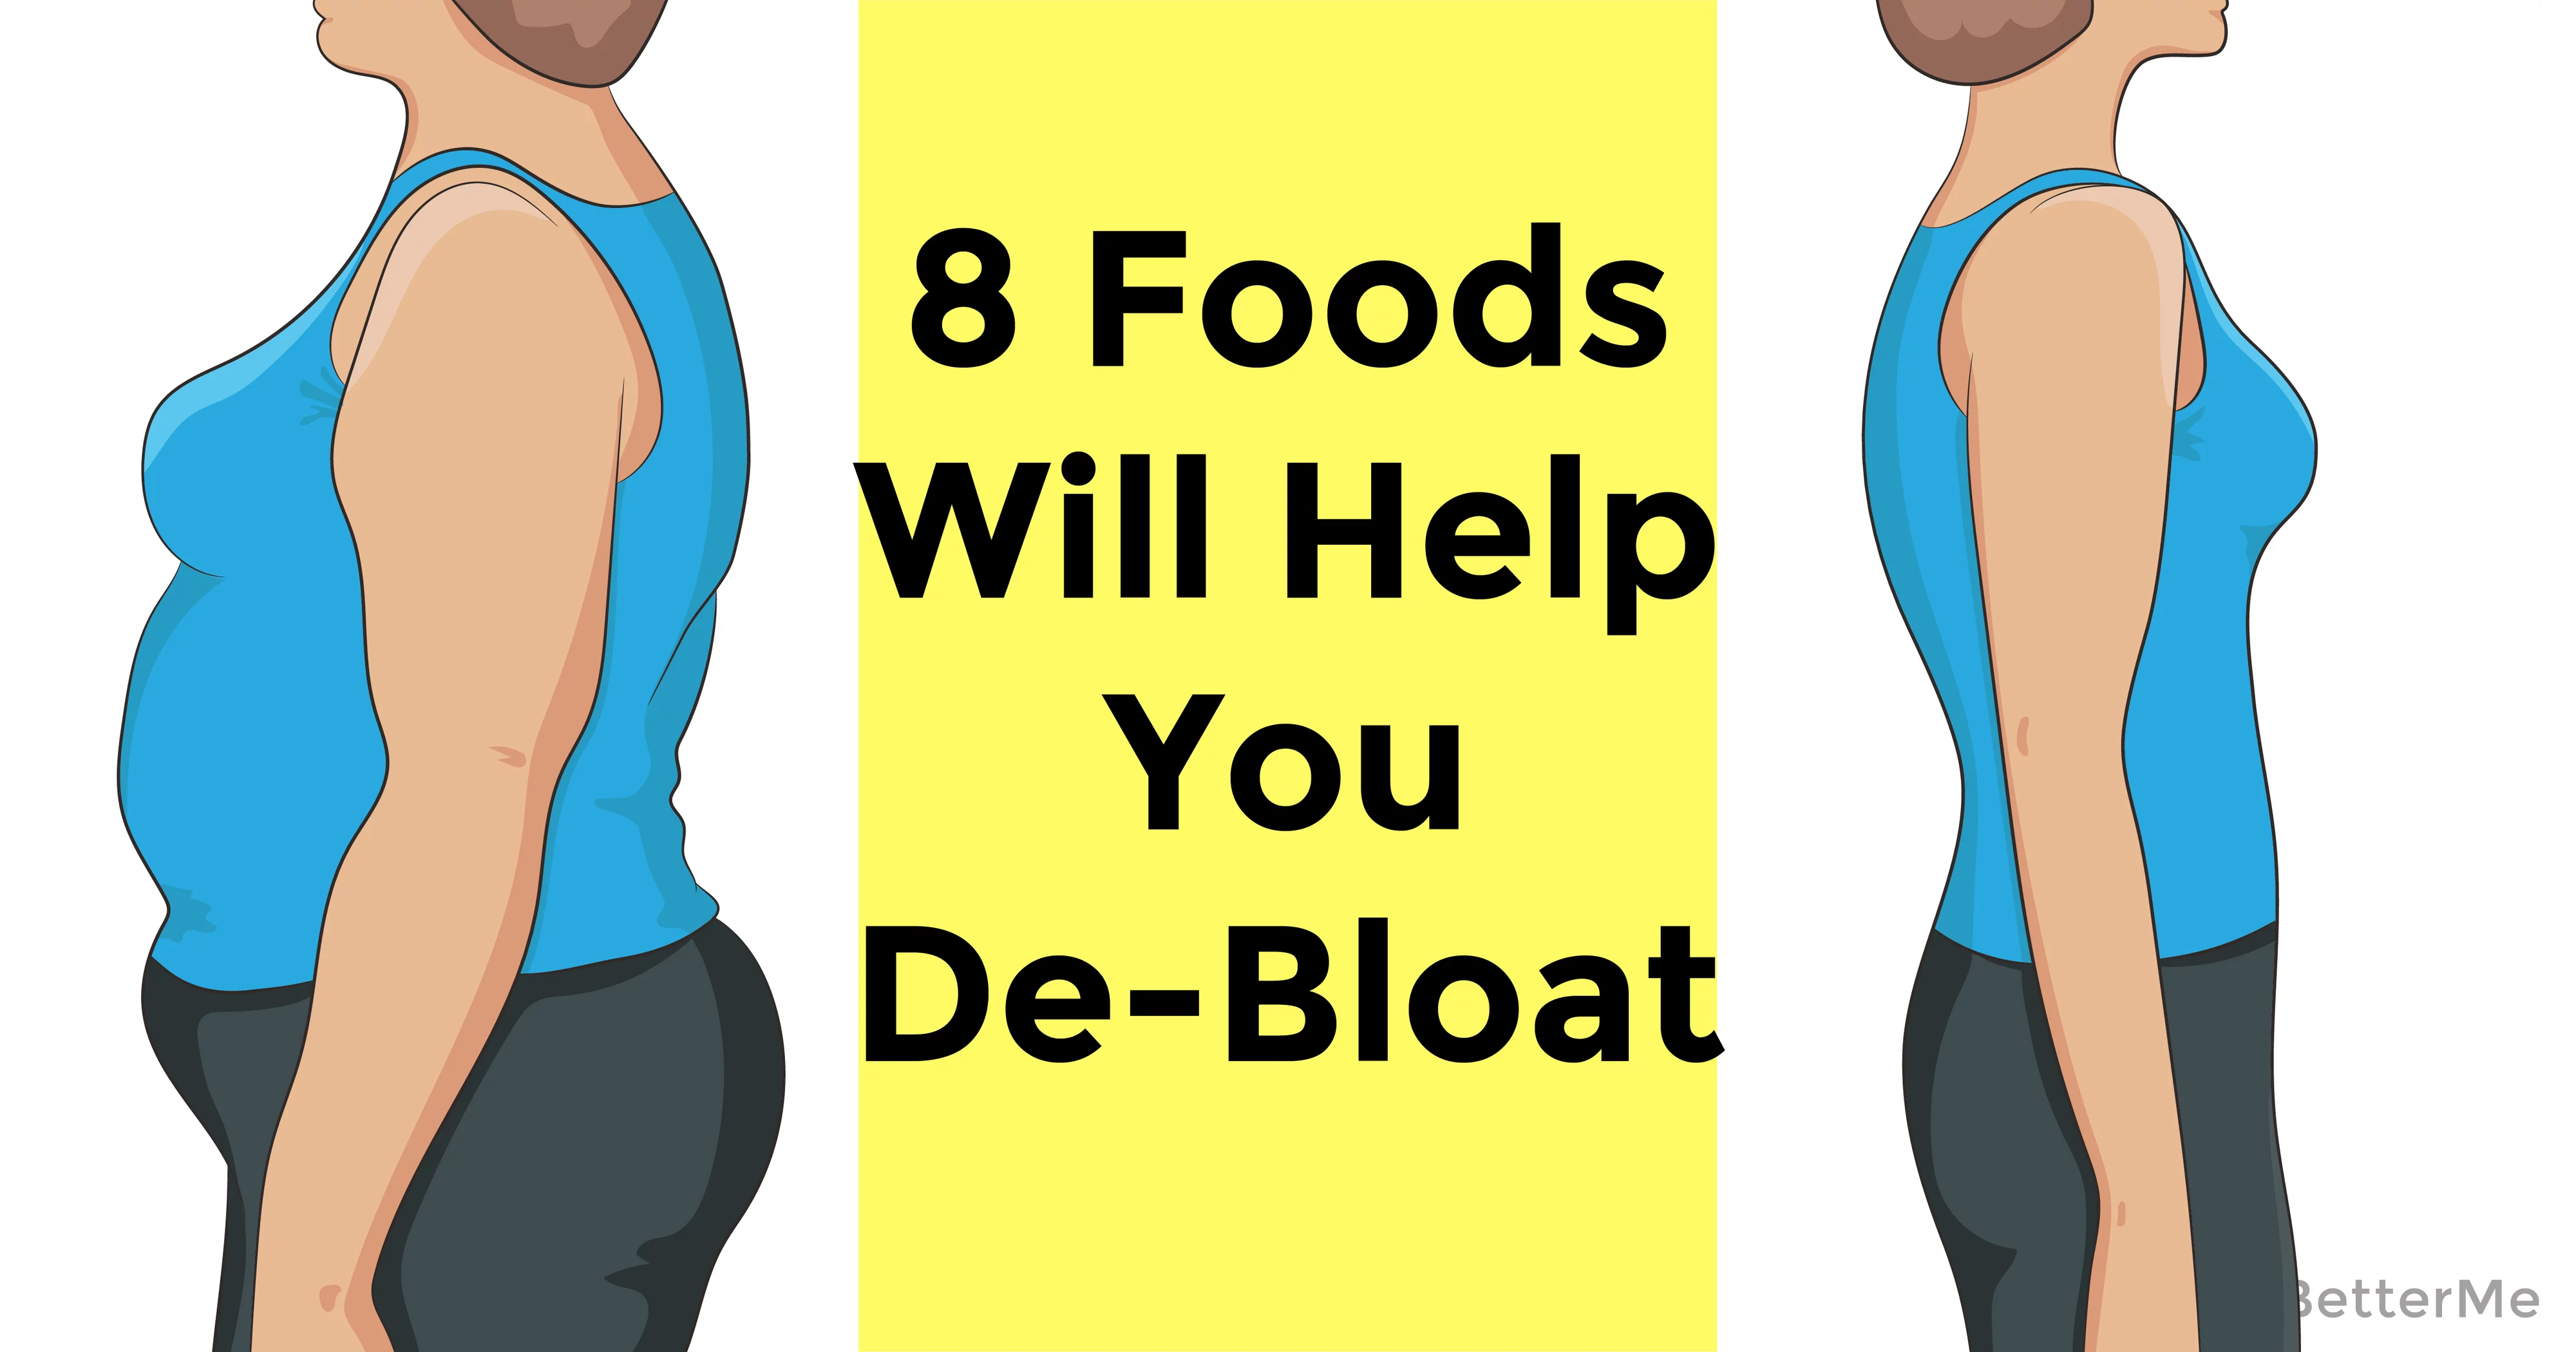 These 8 Foods Will Help You De